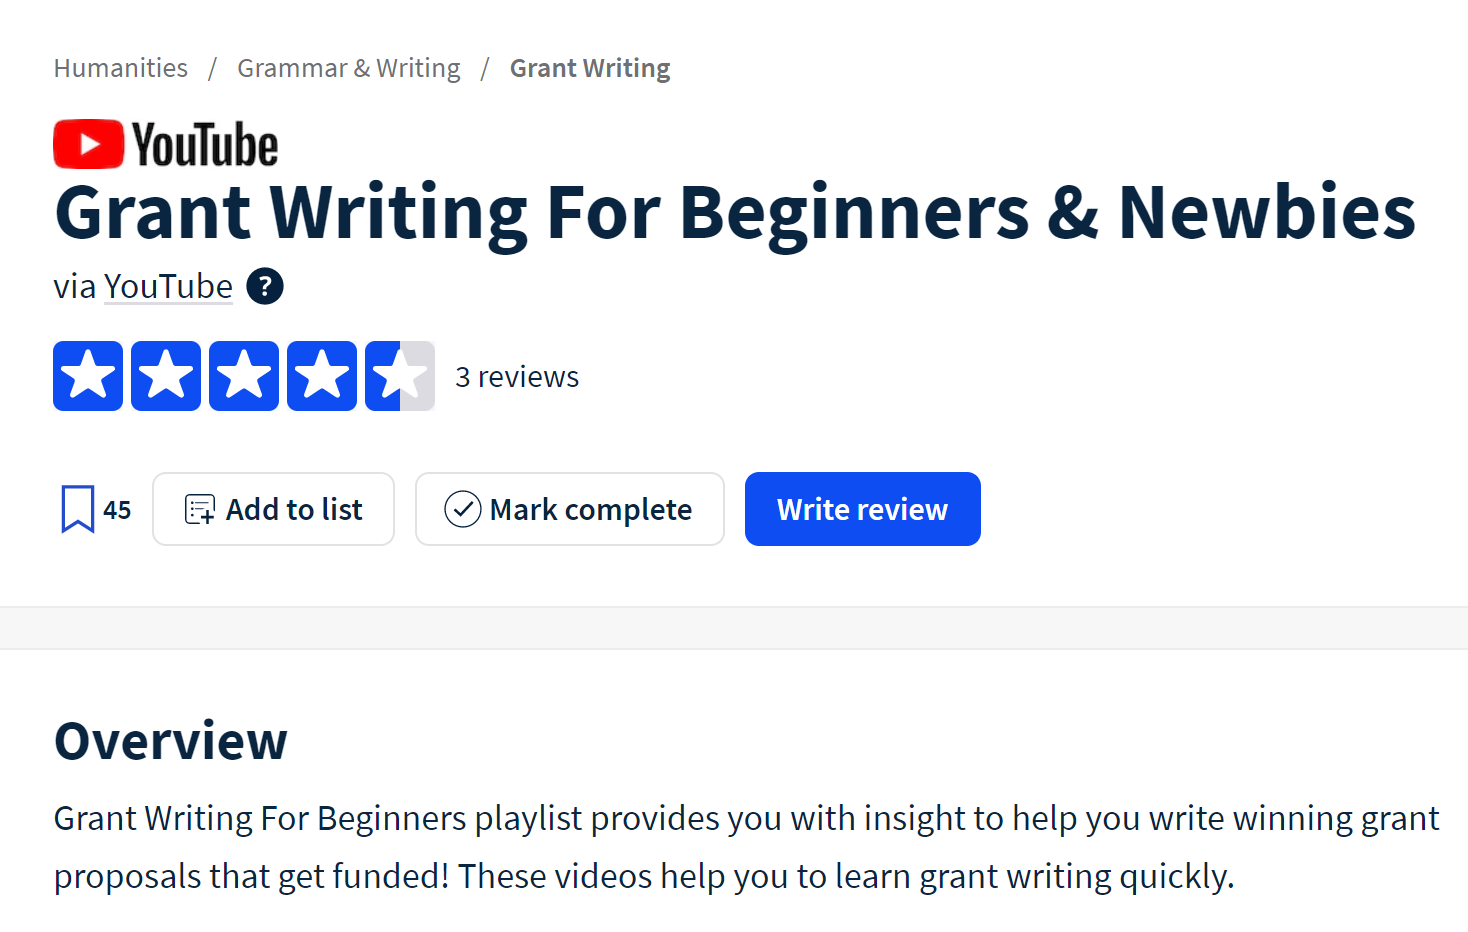 Grant Writing for Beginners and Newbies